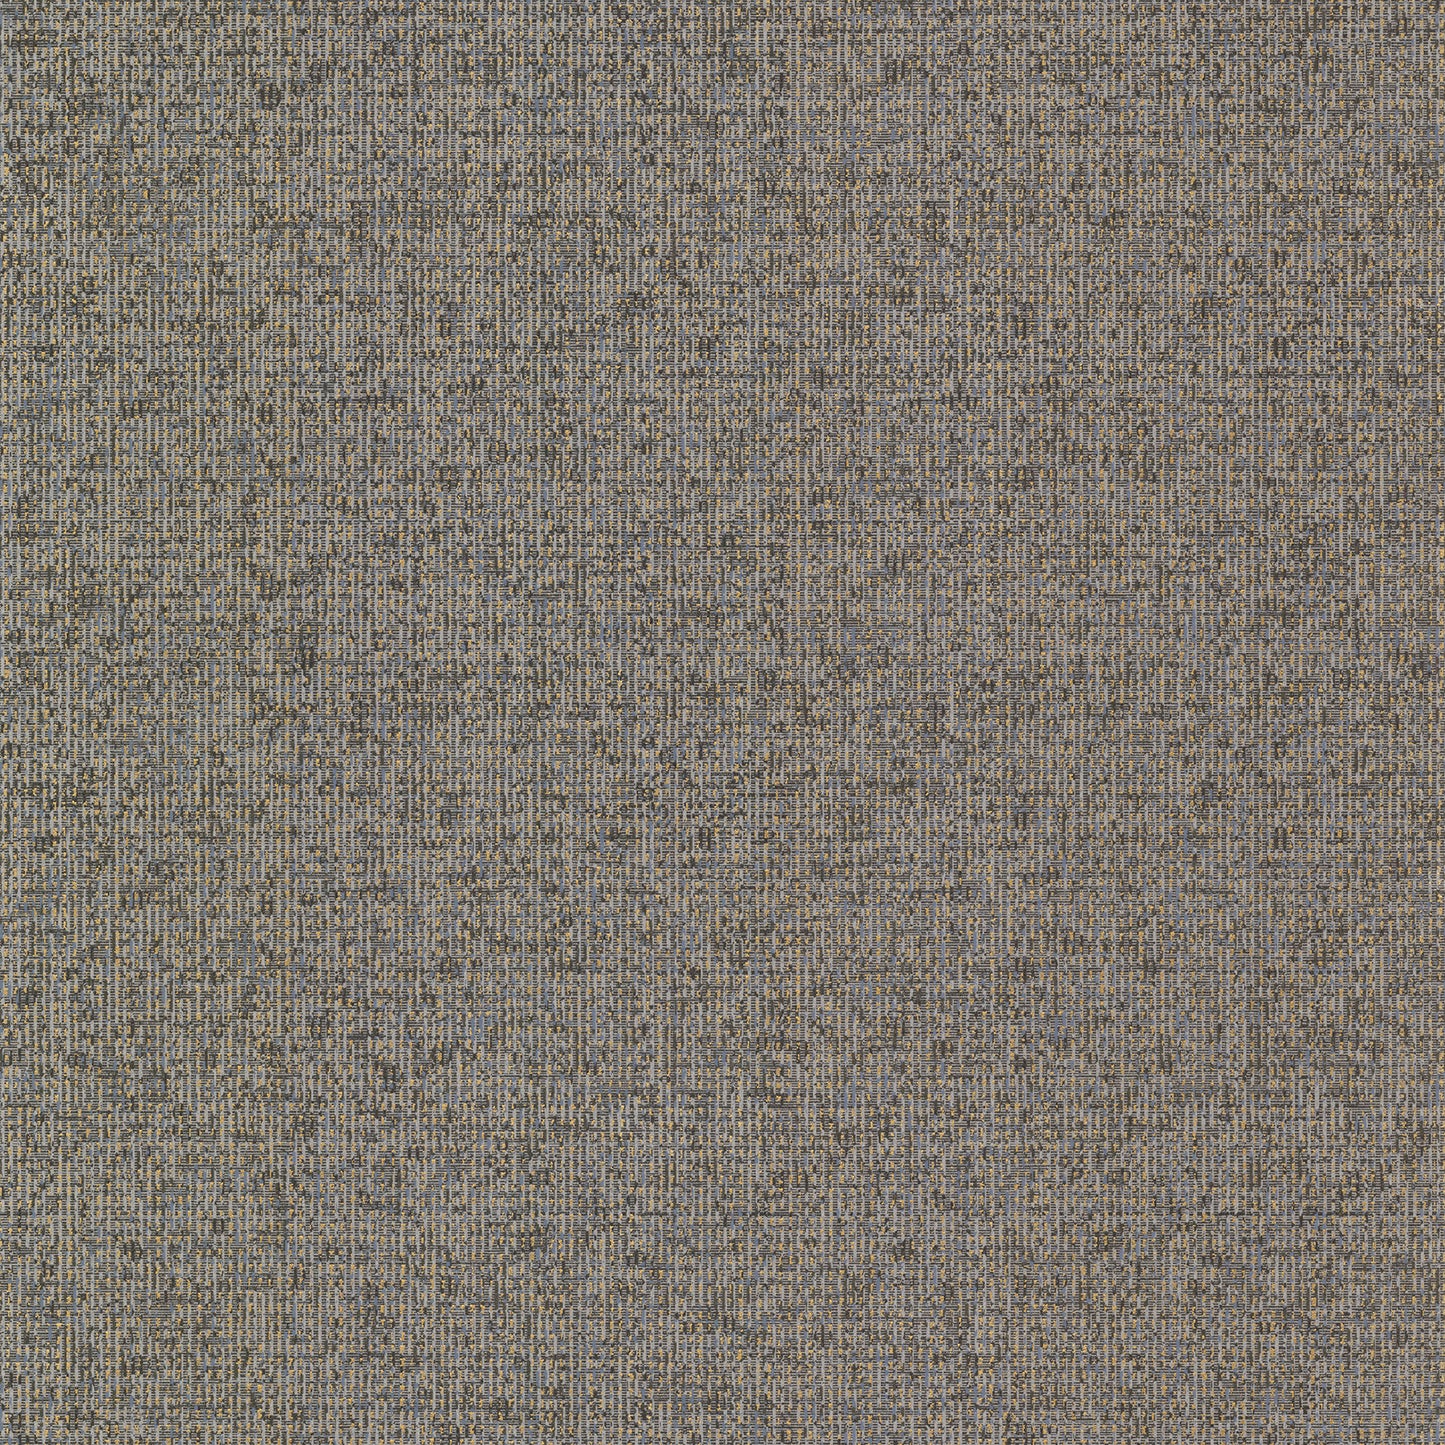 Looking for 4019-86481 Lustre Maia Stone Faux Linen Stone A-Street Prints Wallpaper